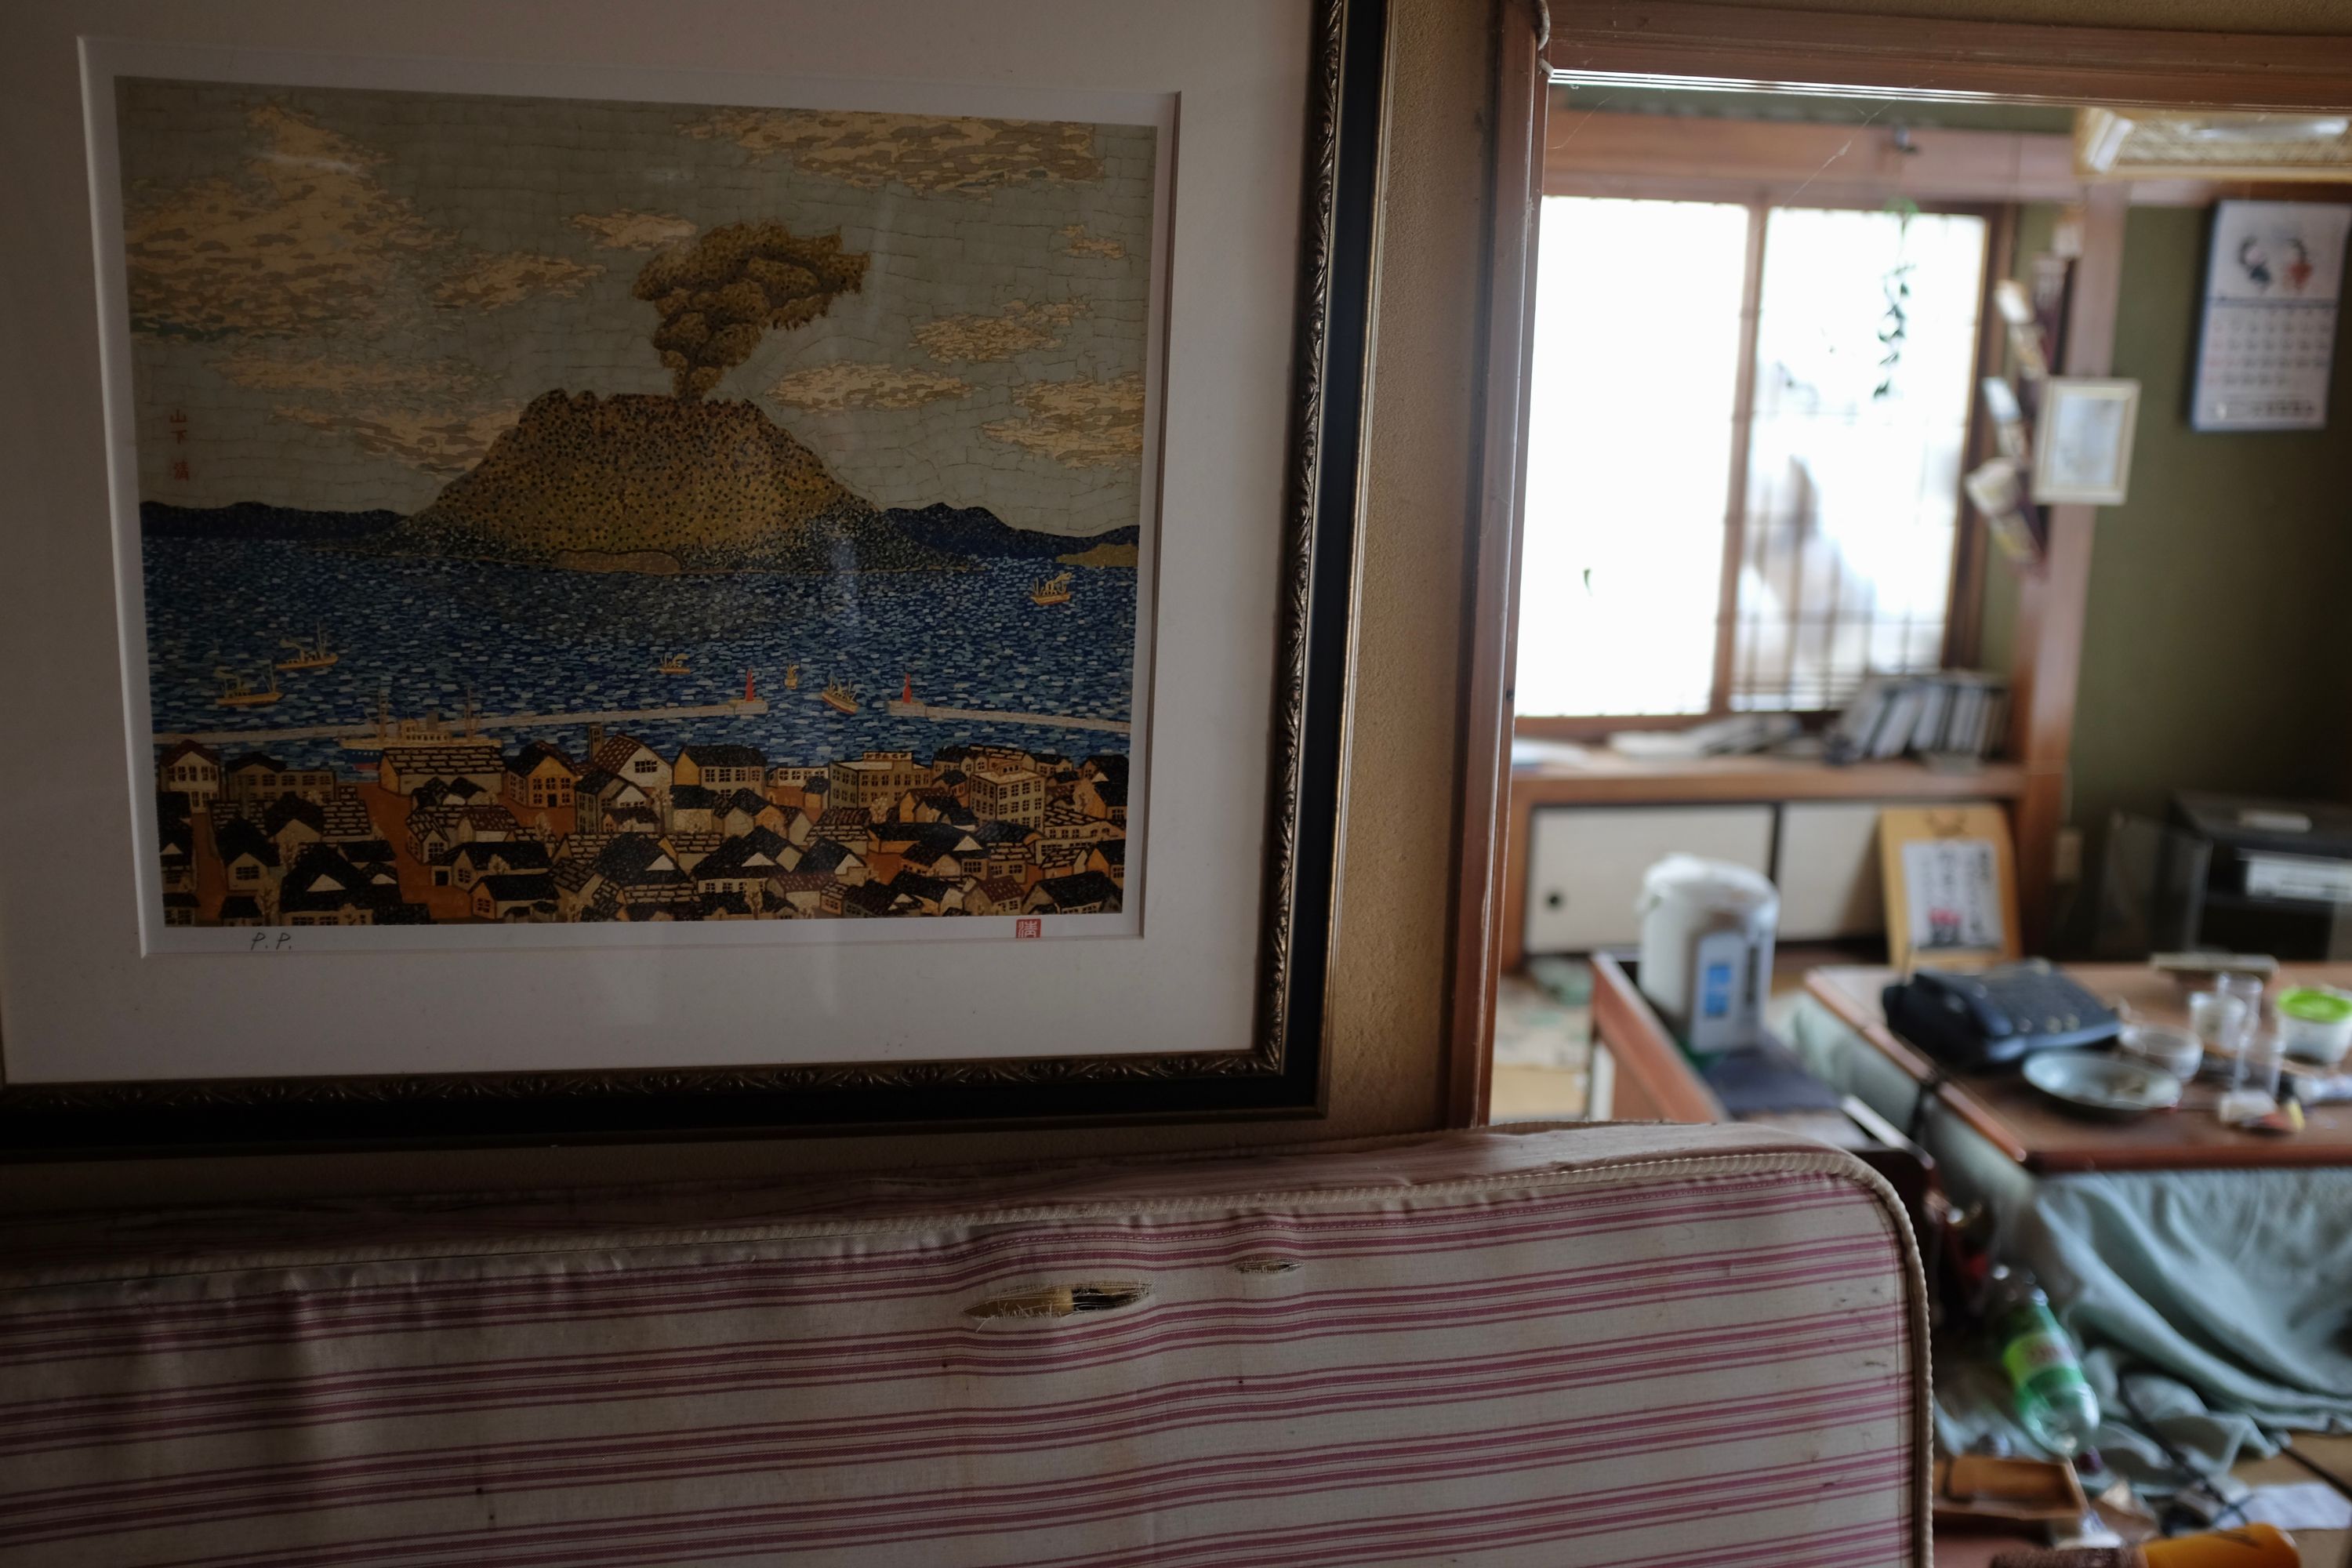 A painting of Kagoshima on the wall, and behind it a lot of scattered items in a kitchen.